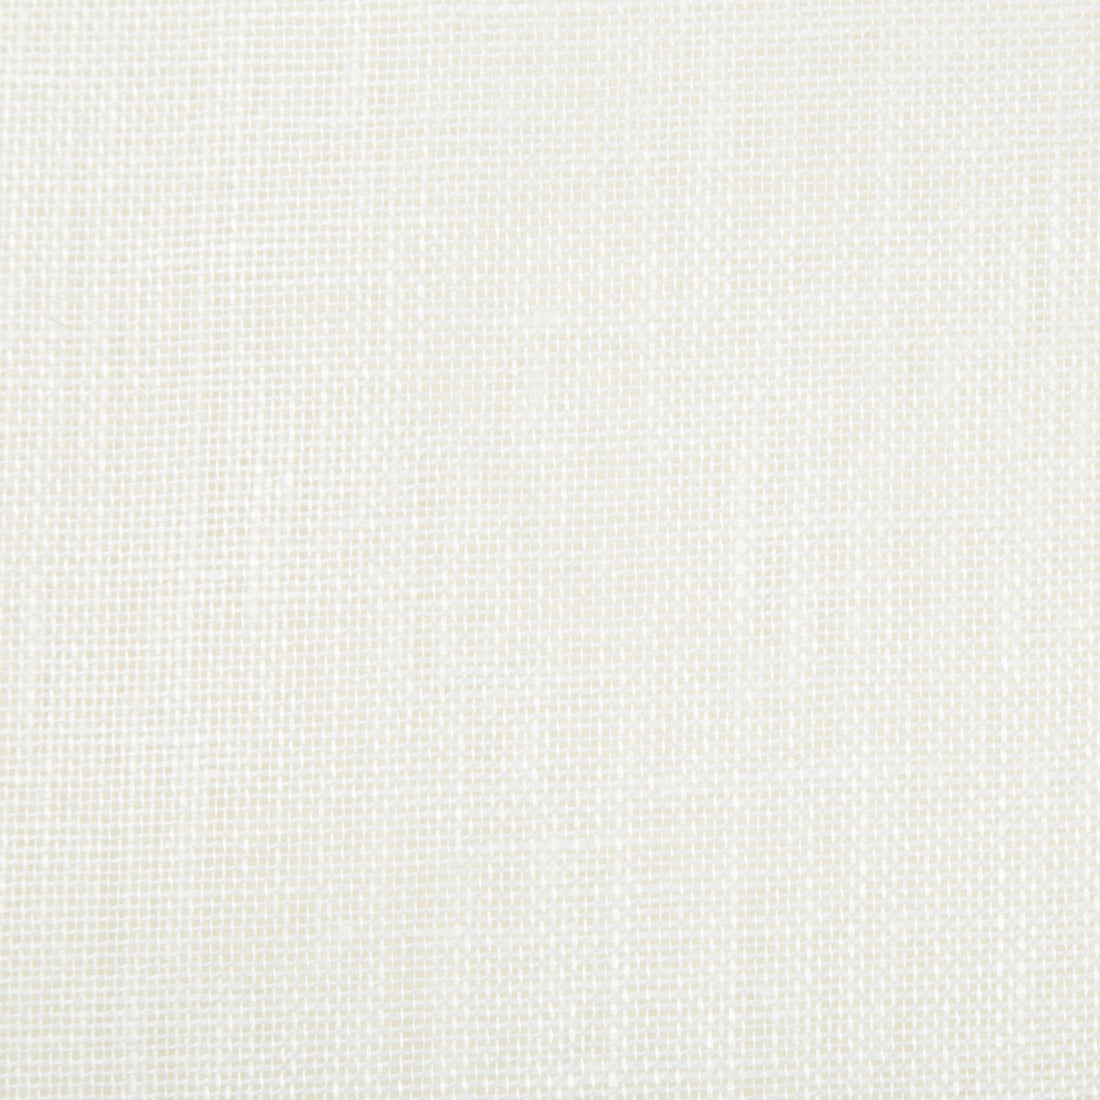 Lynette fabric in white color - pattern 8014135.101.0 - by Brunschwig &amp; Fils